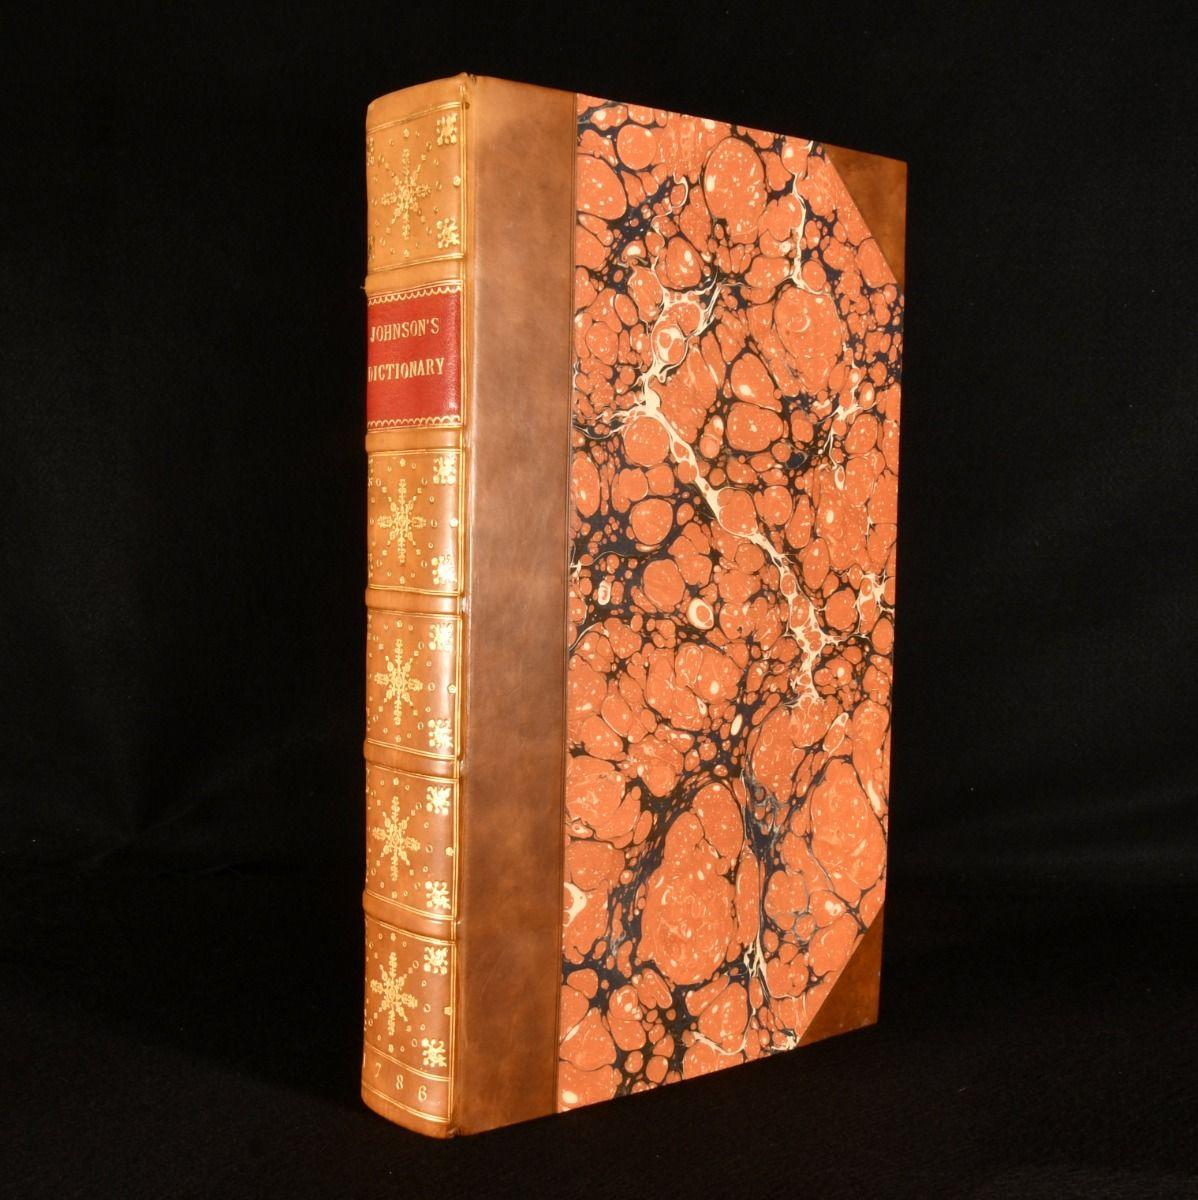 A beautiful edition of Johnson's dictionary, a striking copy of the first edition complete in one volume.

The first edition to be published in one volume, published by Harrison & Co. This immense work has previously always been published in two